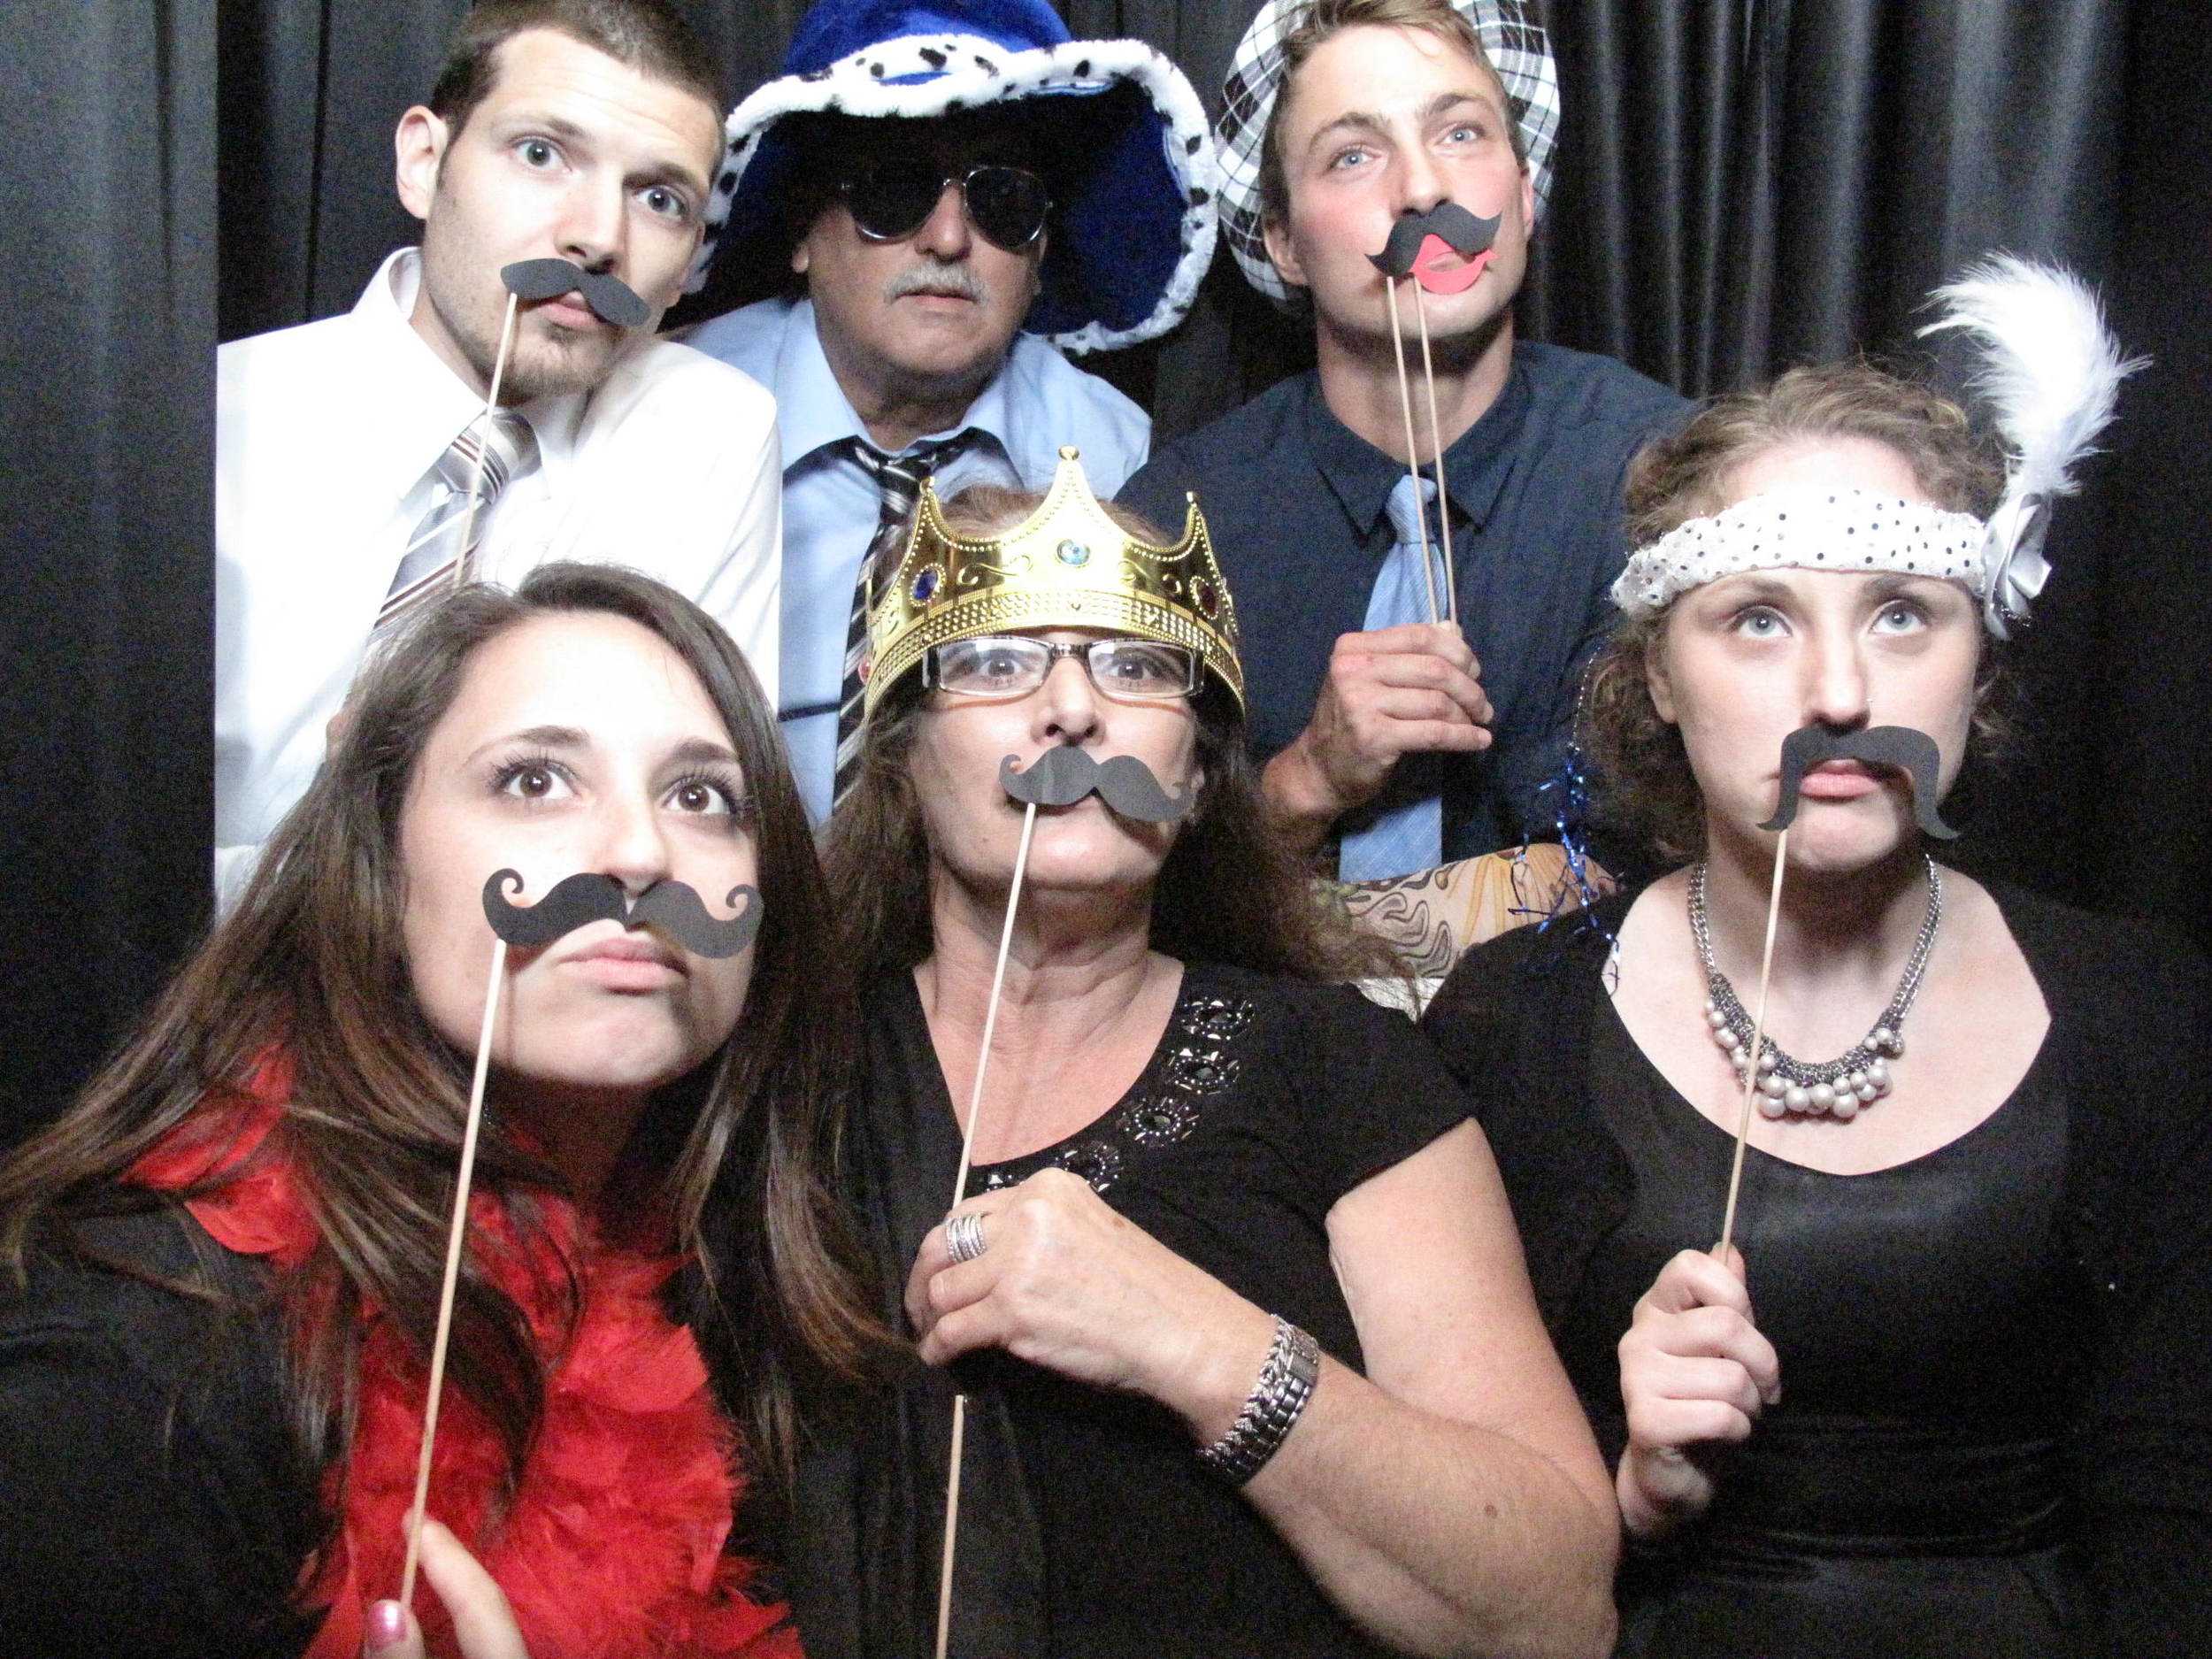 Snapshot Photobooths at the Doubltree in Tinton Falls, New Jersey